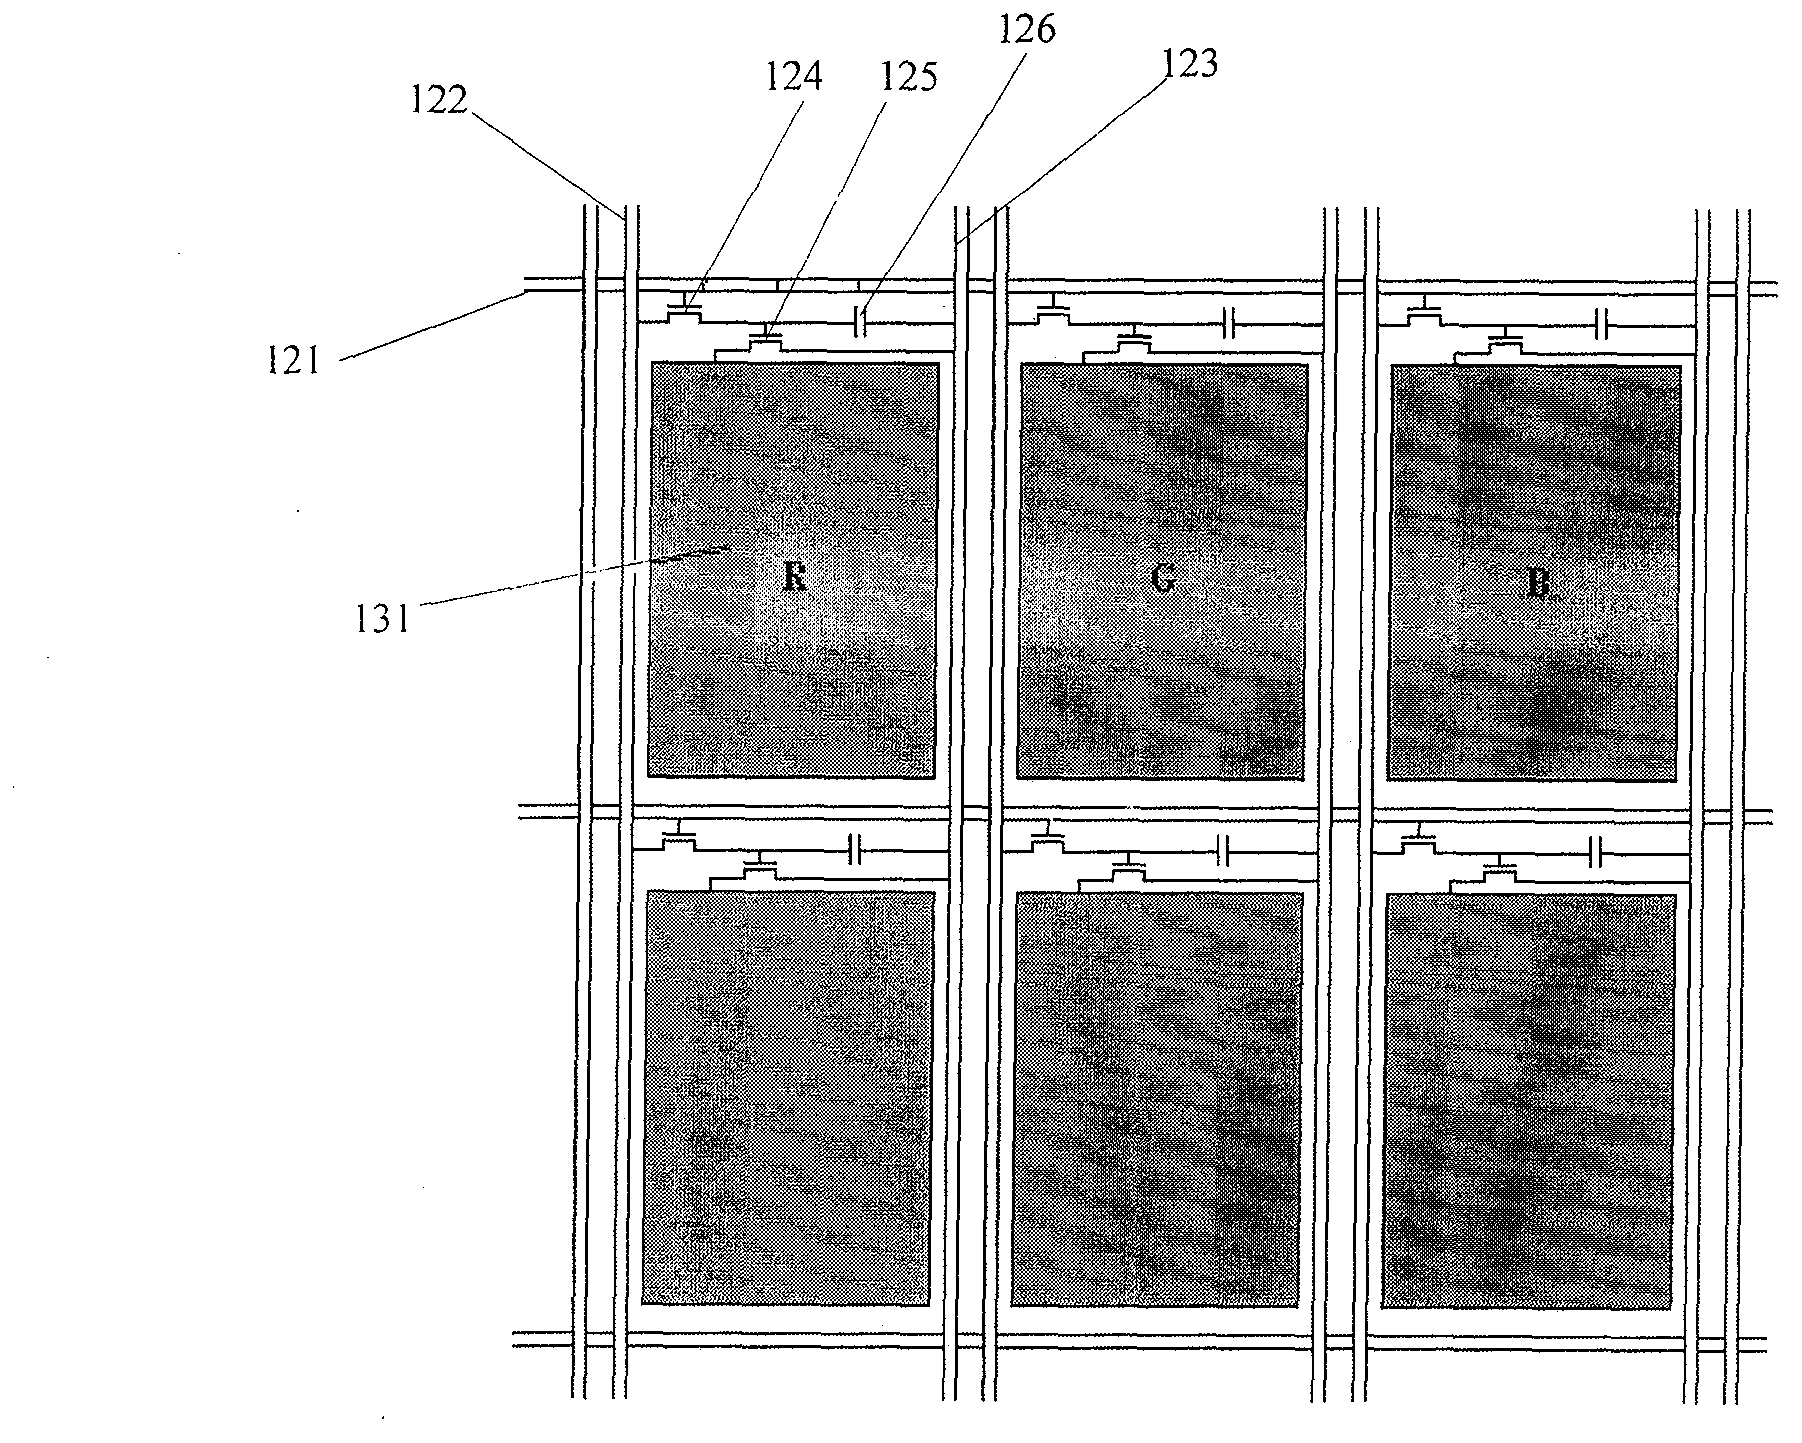 Organic light-emitting diode (OLED) display screen and touch detection unit